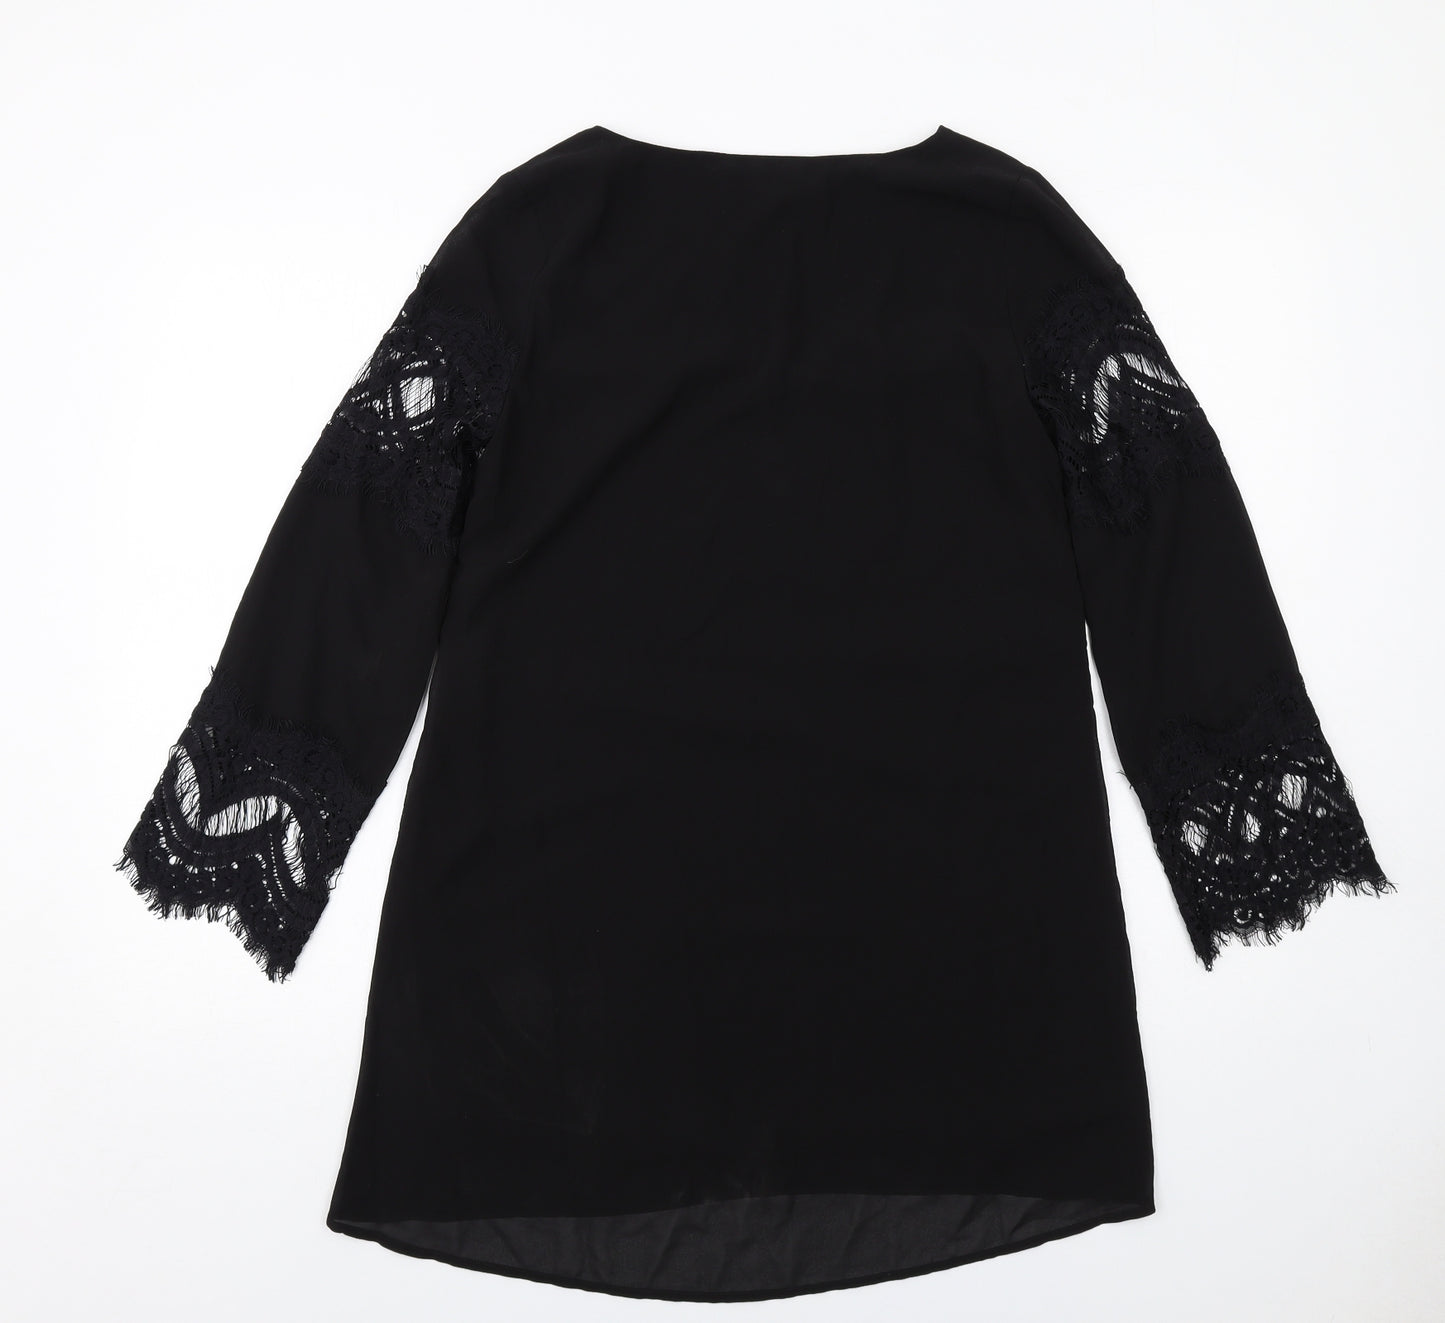 Missguided Womens Black Polyester A-Line Size 8 V-Neck Pullover - Lace Details on Sleeves